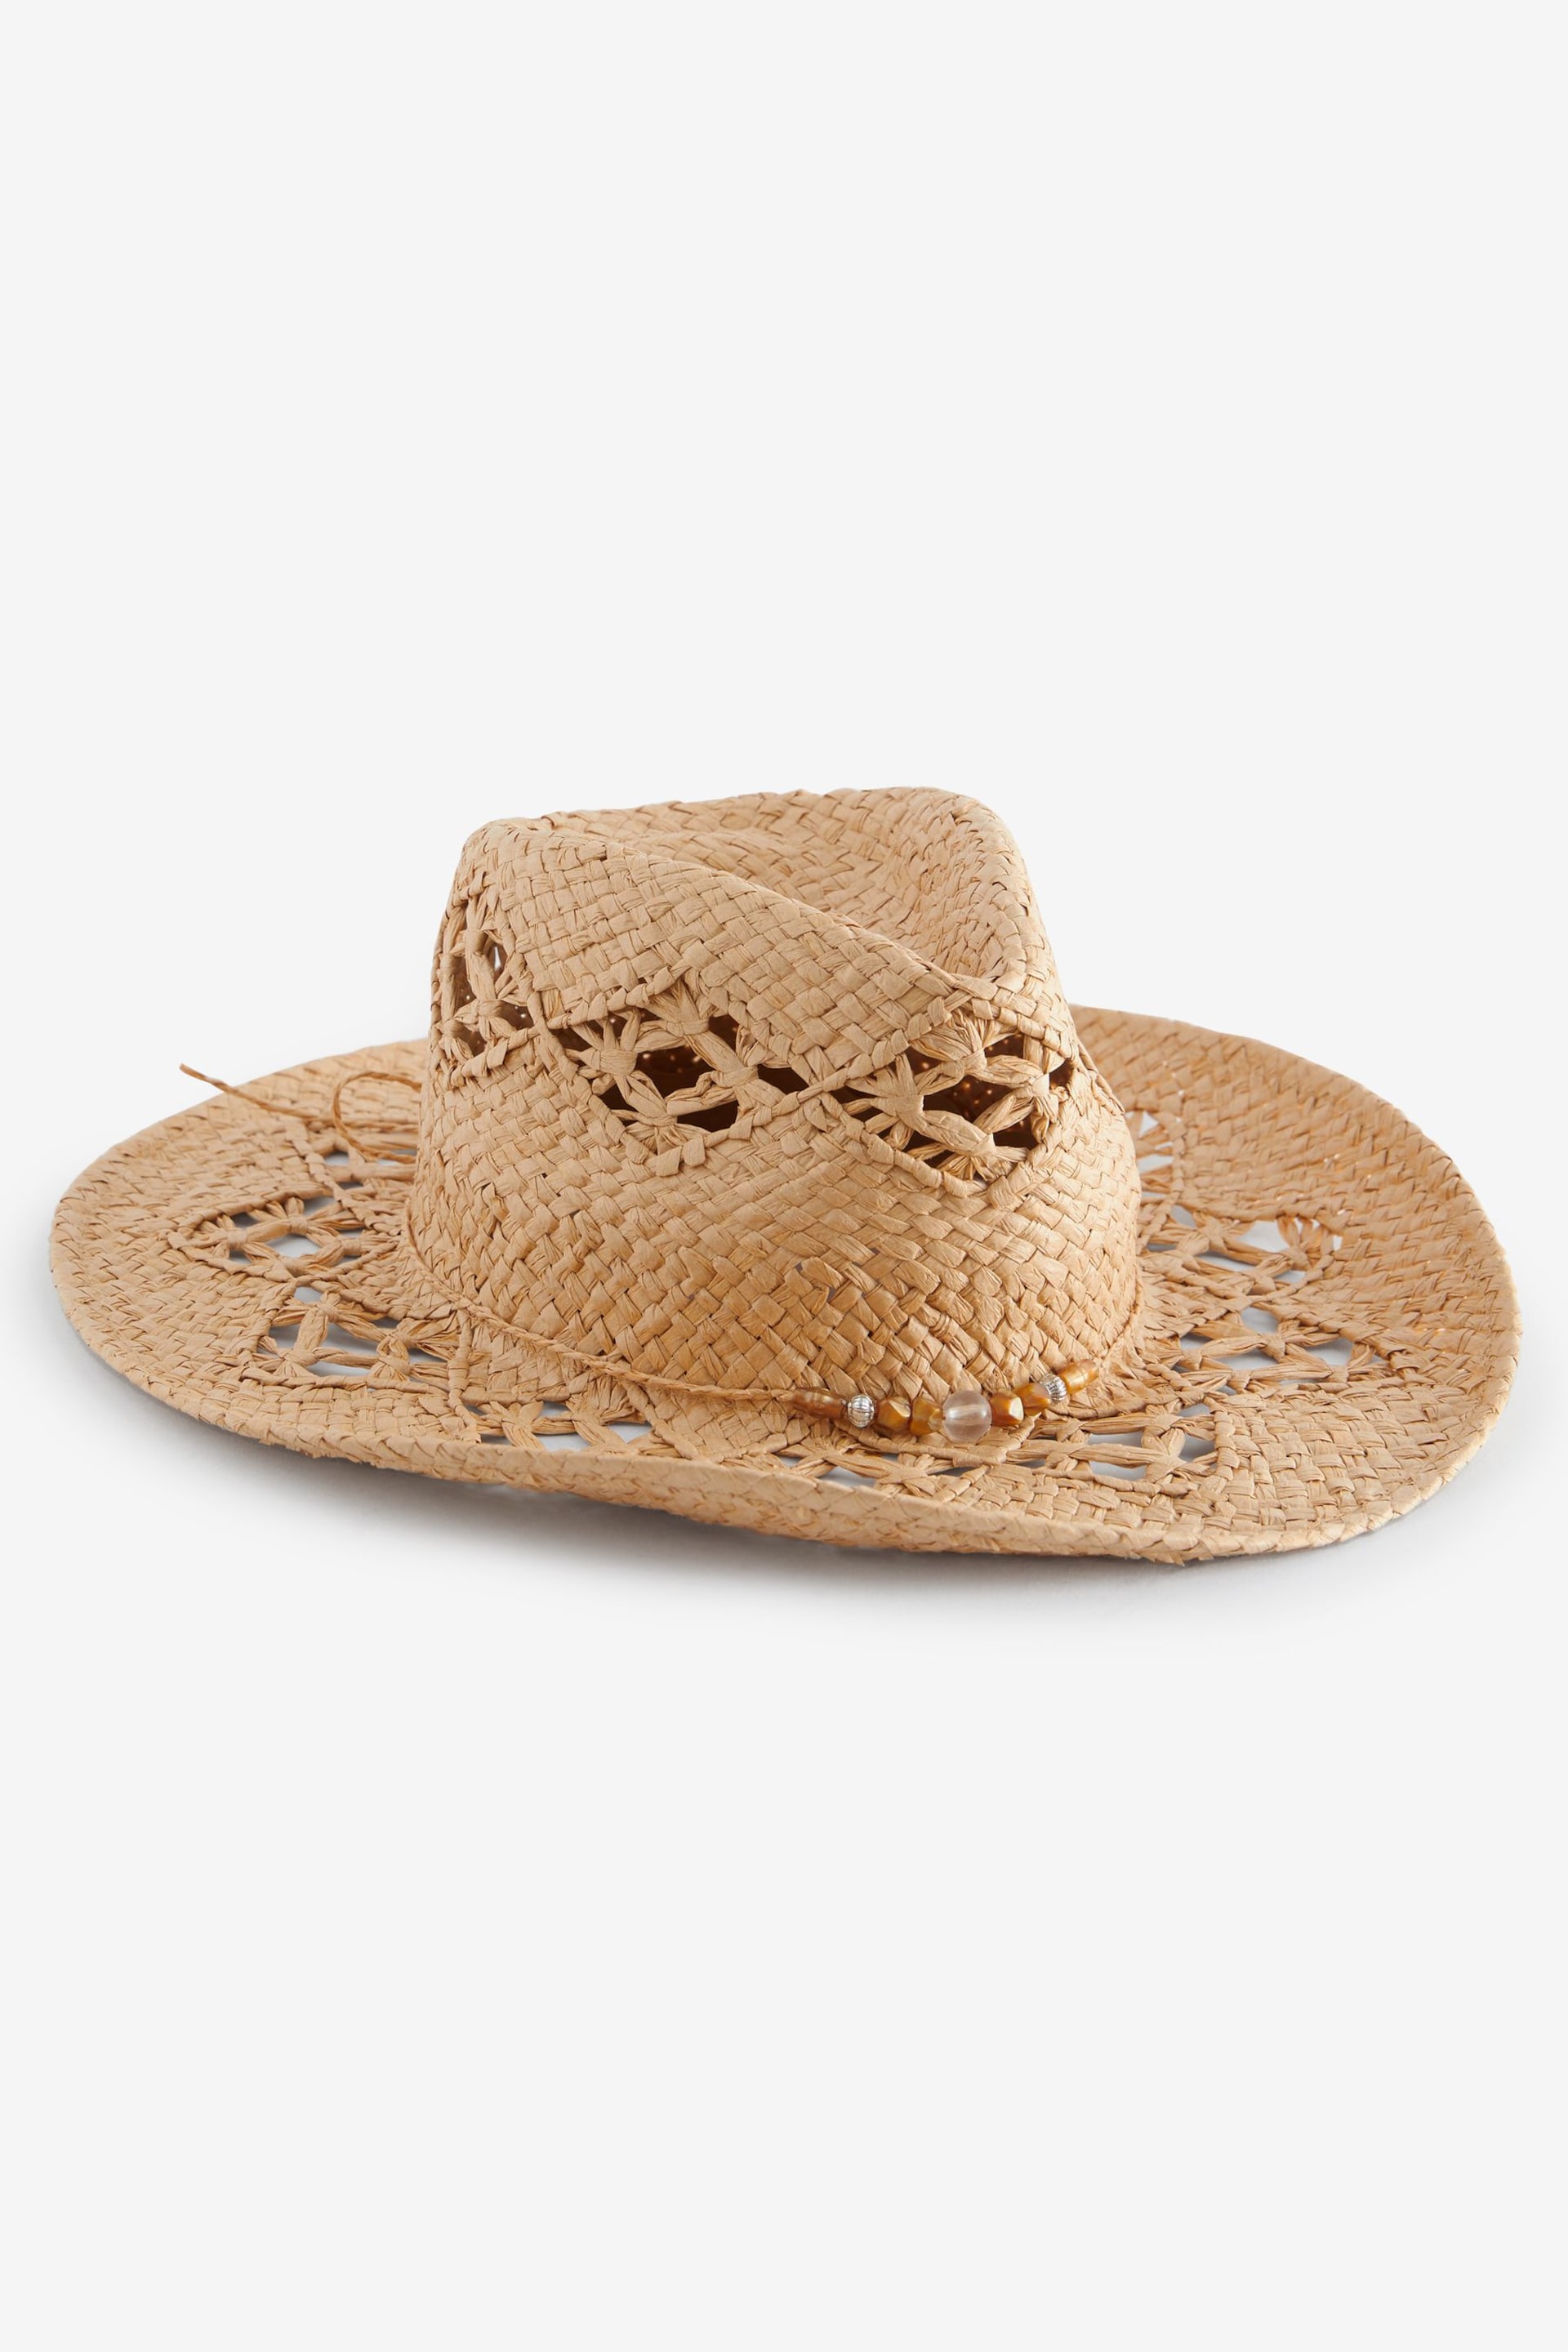 Natural with Shell Chain Cowboy Western Hat - Image 3 of 3